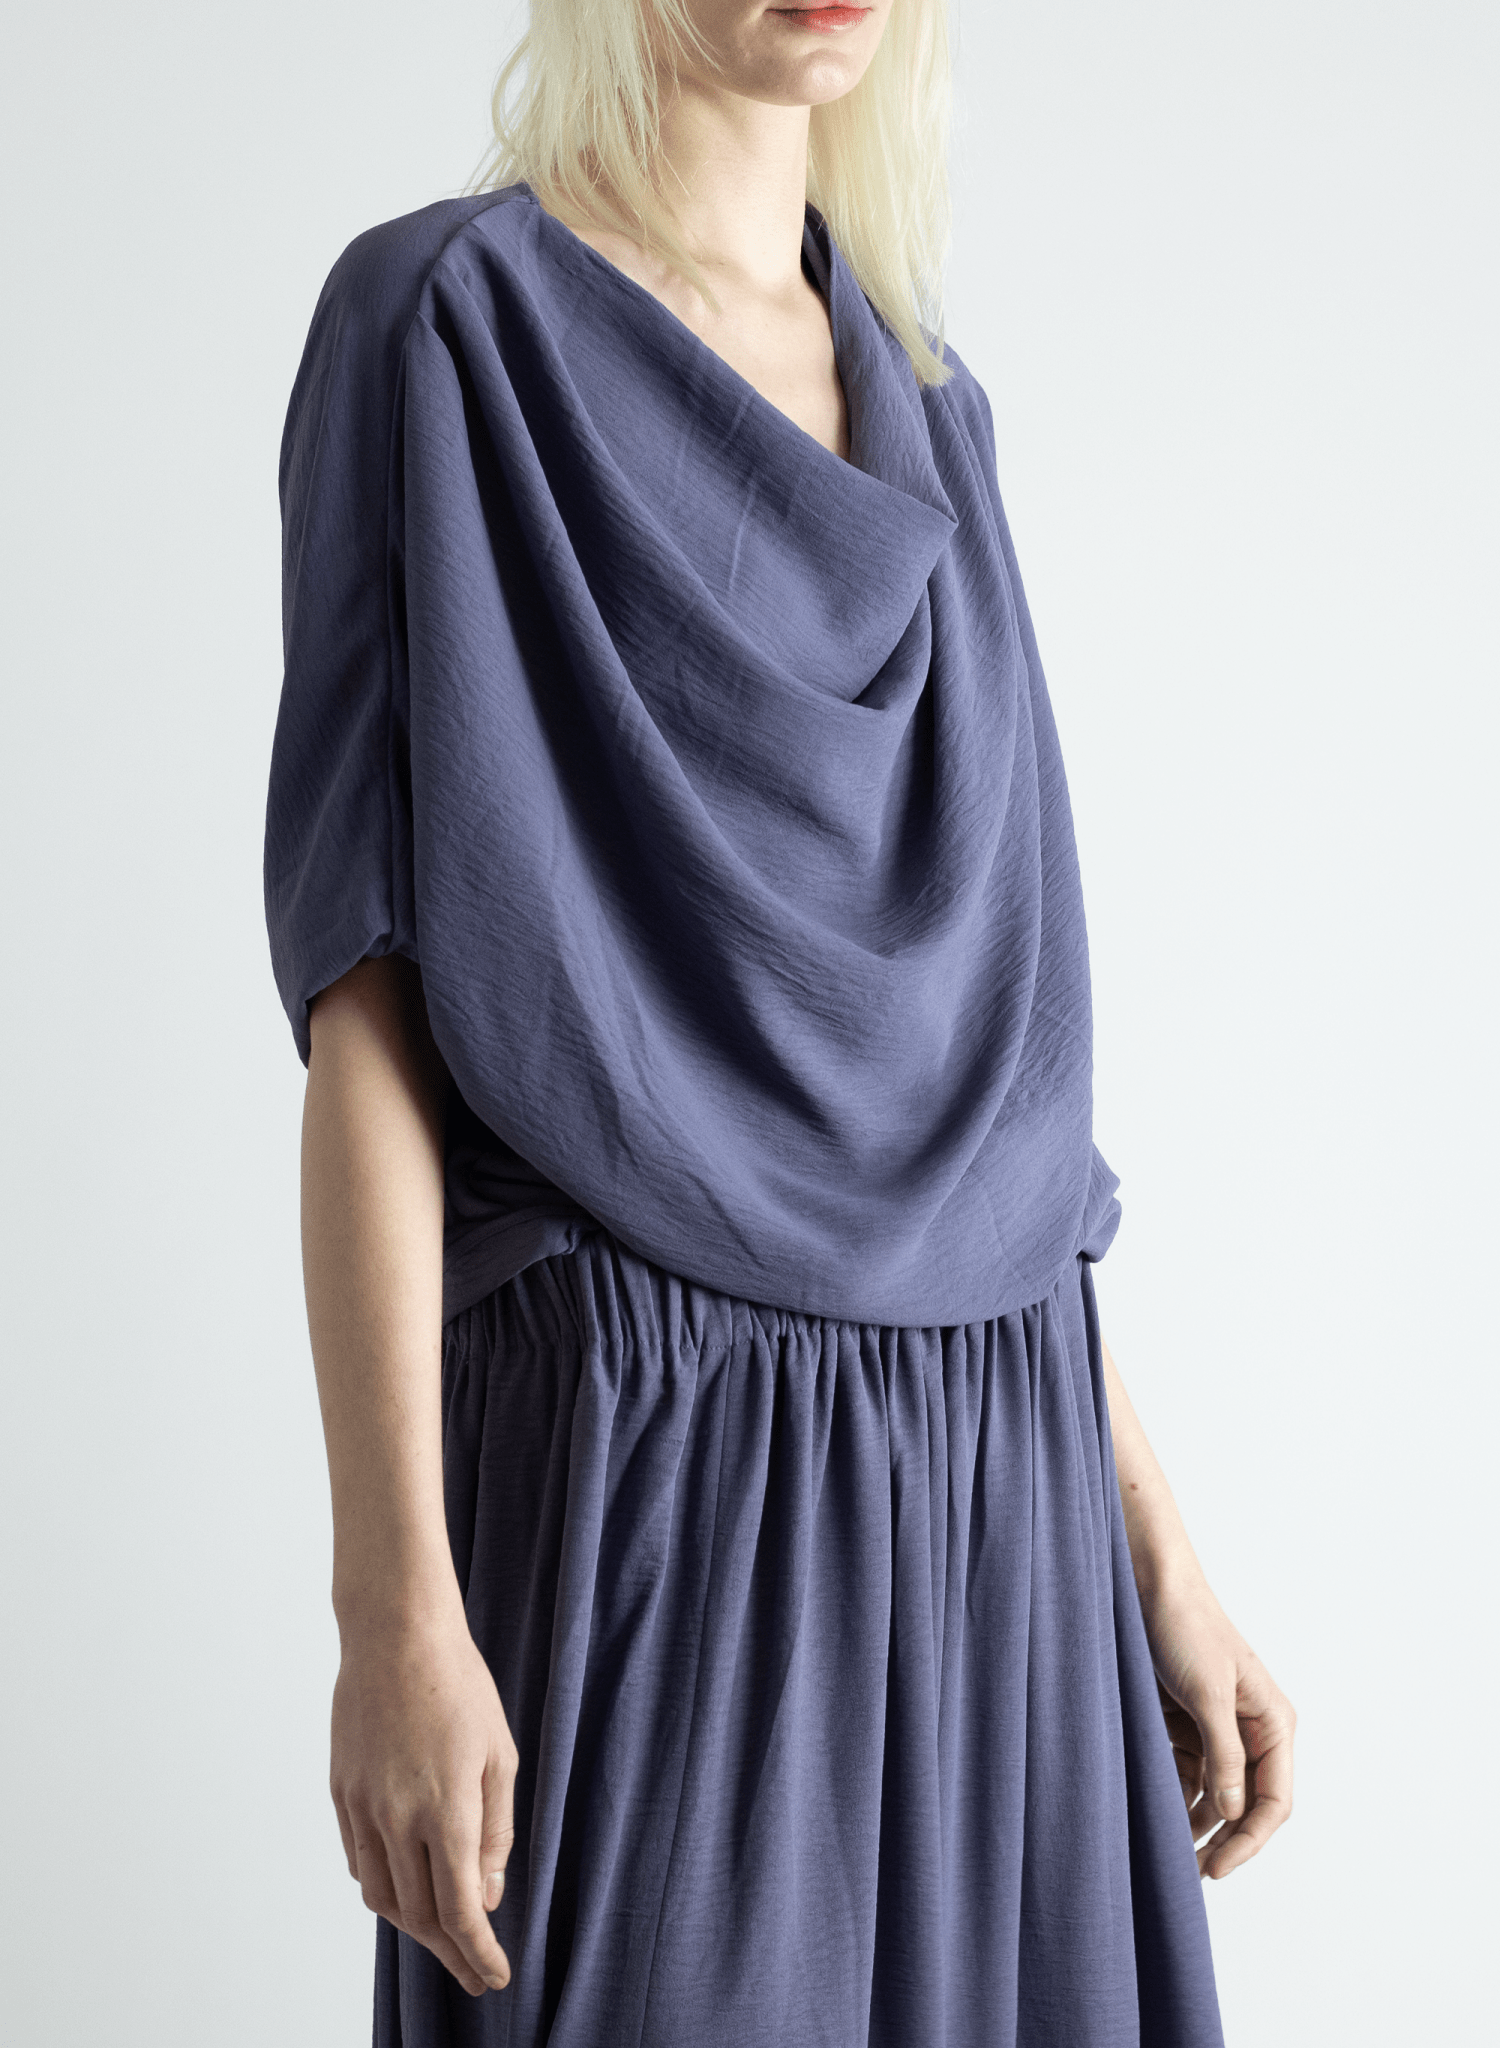 Abstraction Cowl Top - Lilac - Meg Canada